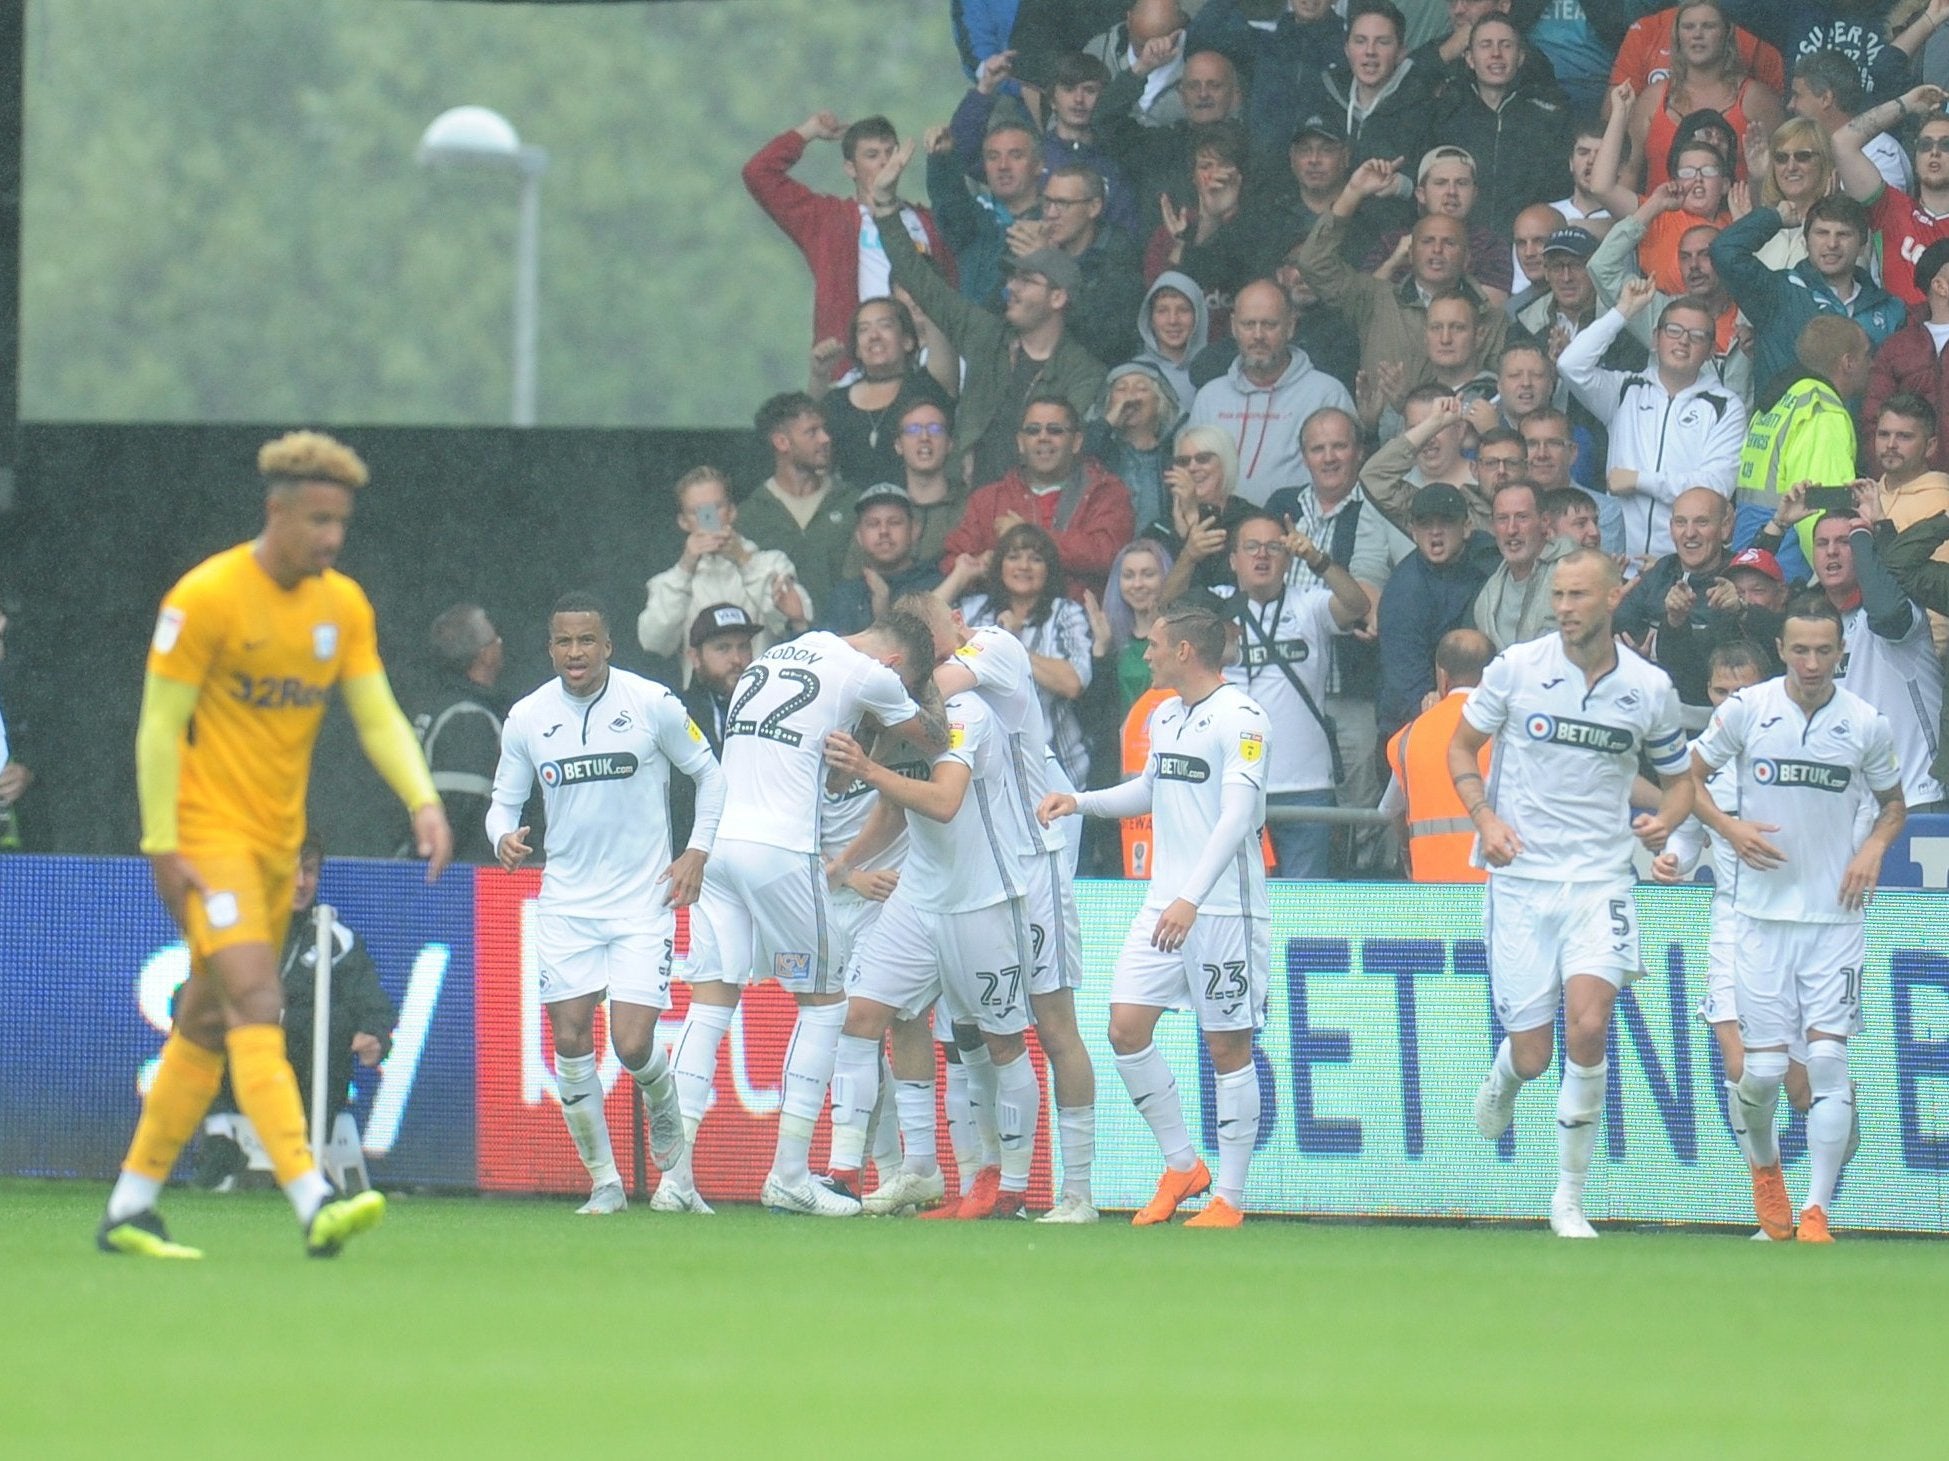 Swansea celebrate after Jay Fulton puts them ahead of Preston North End